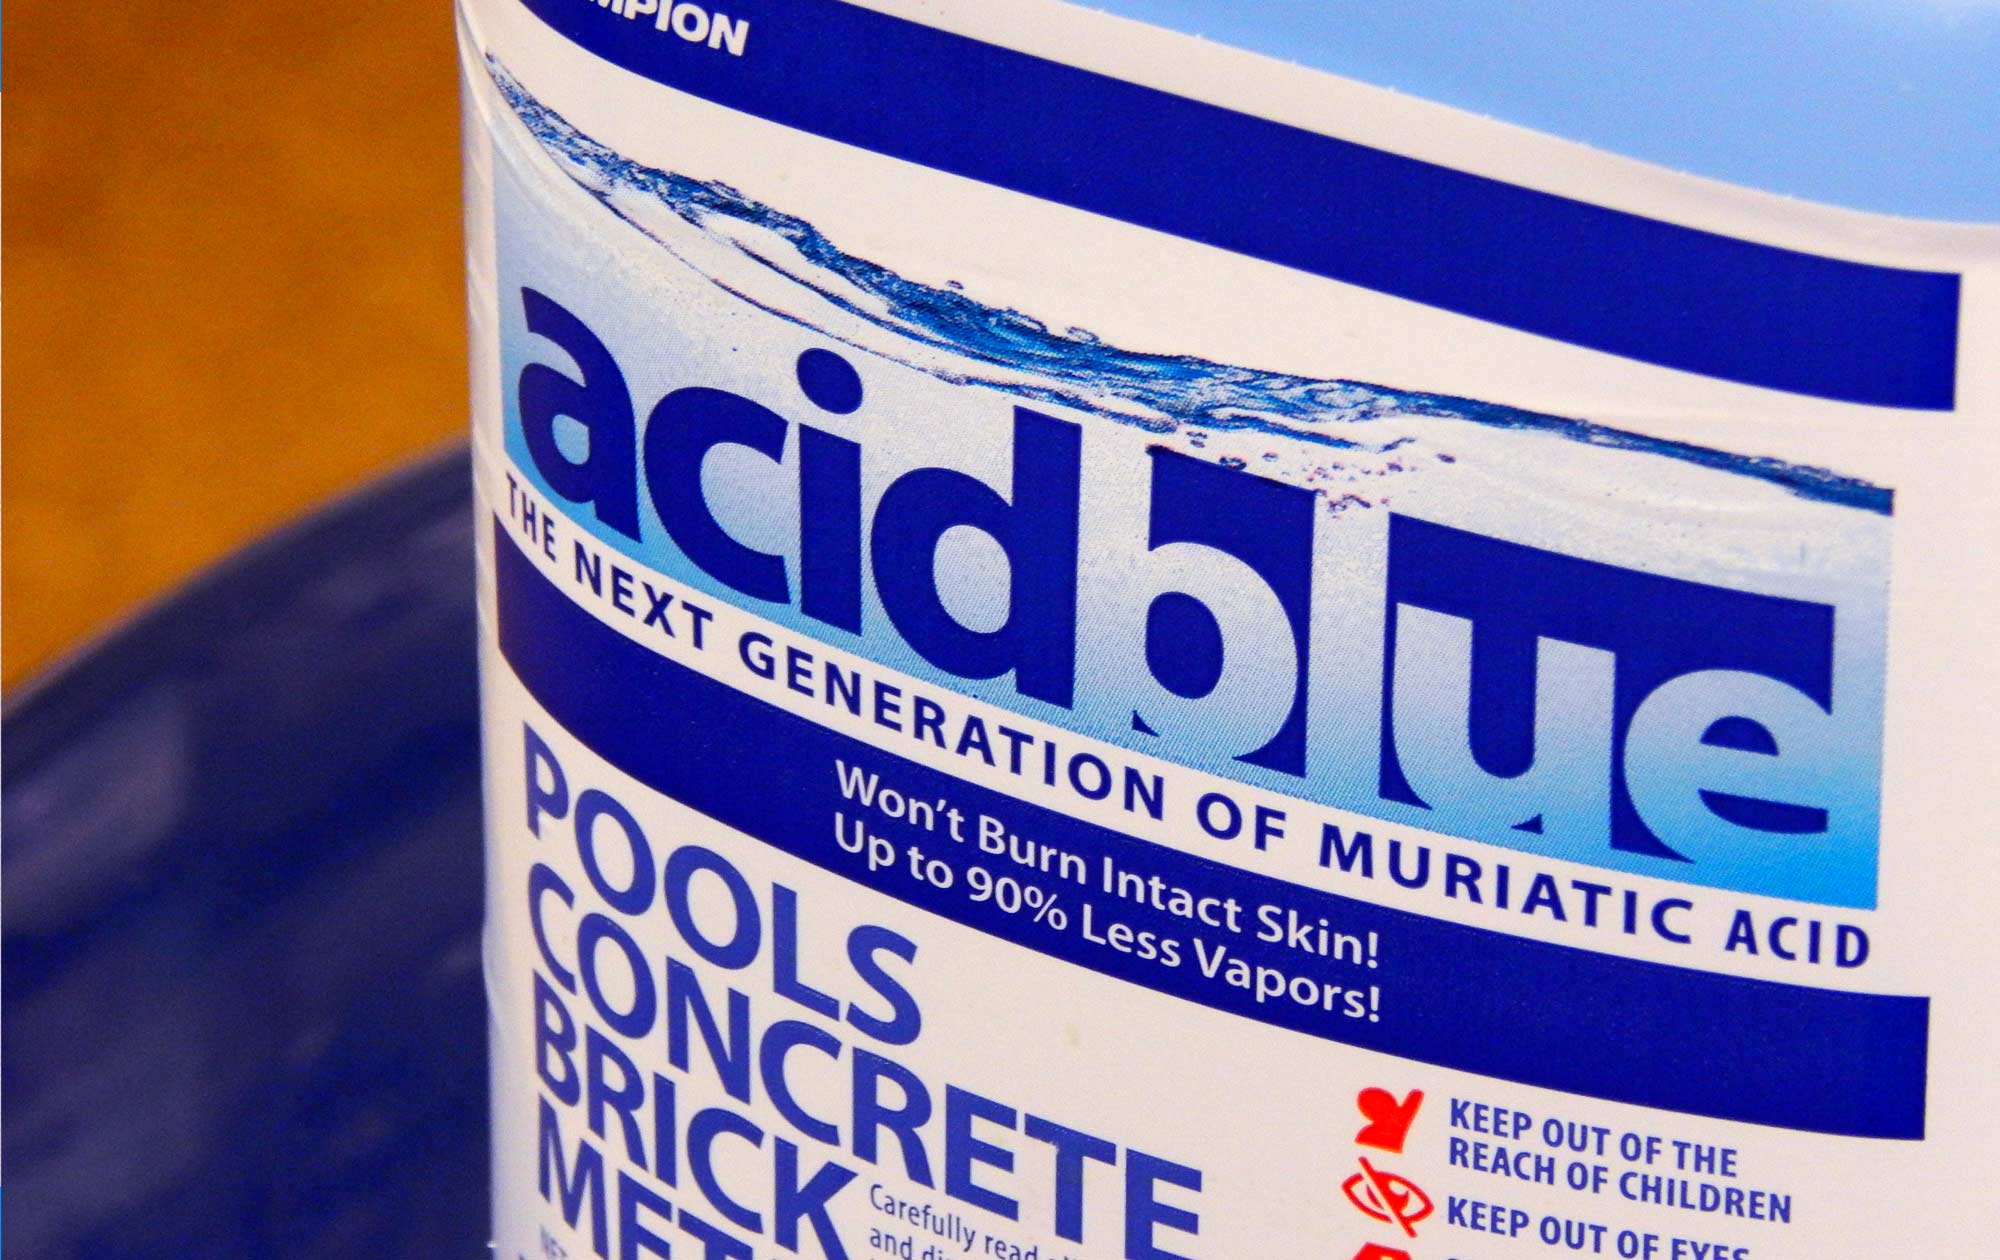 AcidBlue - The Next Generation of Muriatic Acid from Leisure Pool & Spa Supply - Compare to ACID Magic